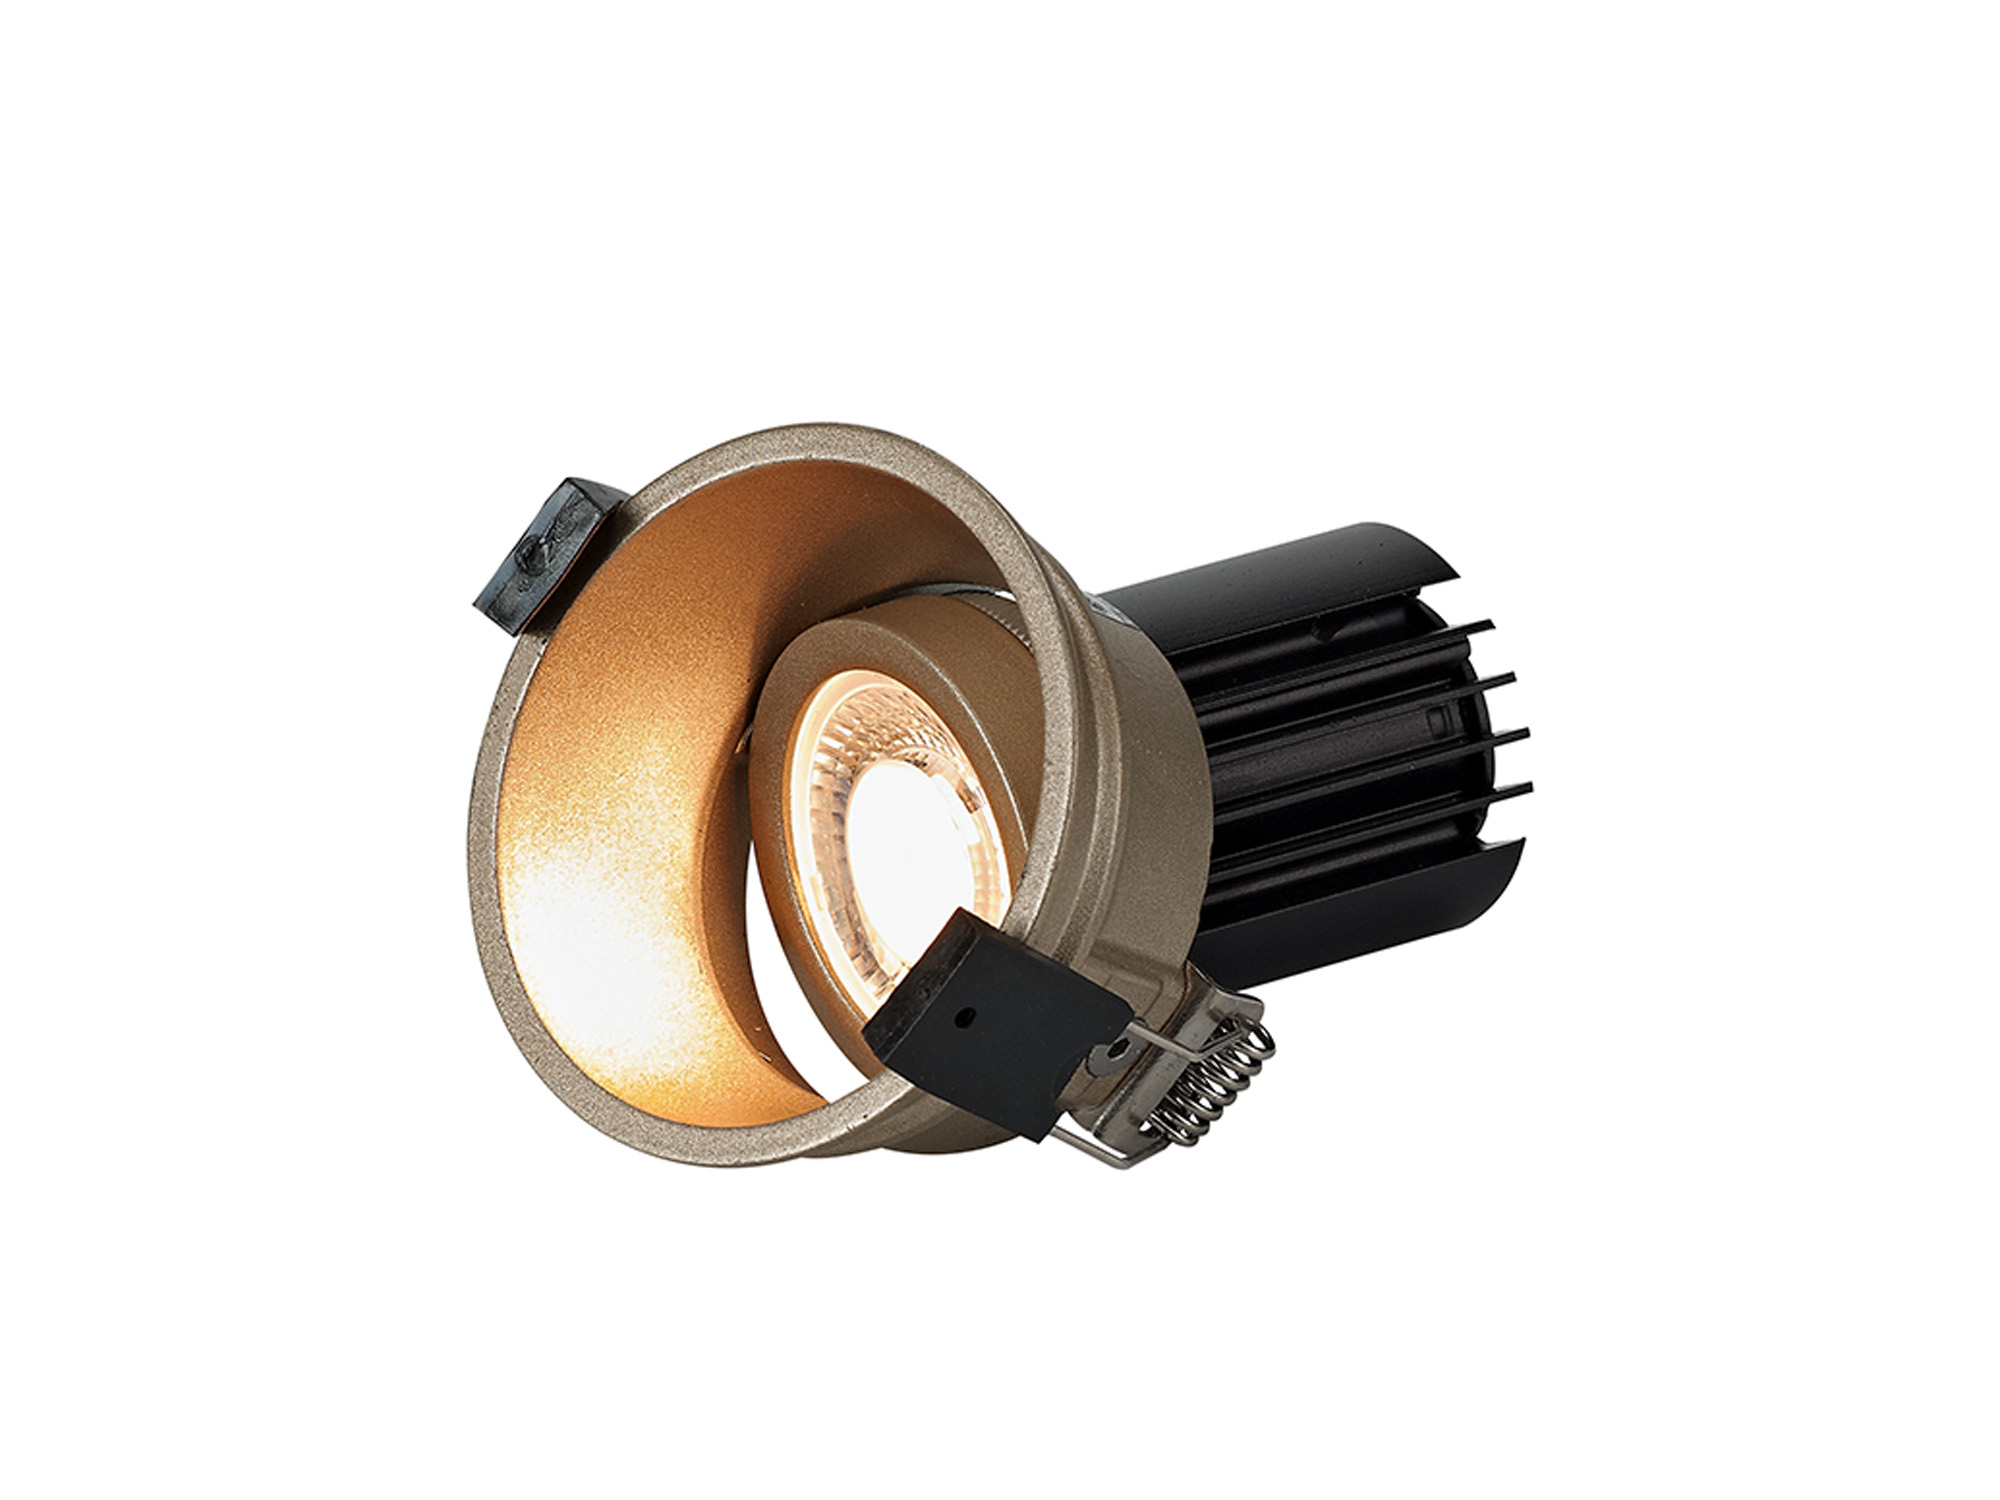 DM201747  Bania A 12 Powered by Tridonic  12W 2700K 1200lm 12° CRI>90 LED Engine; 350mA Gold Adjustable Recessed Spotlight; IP20